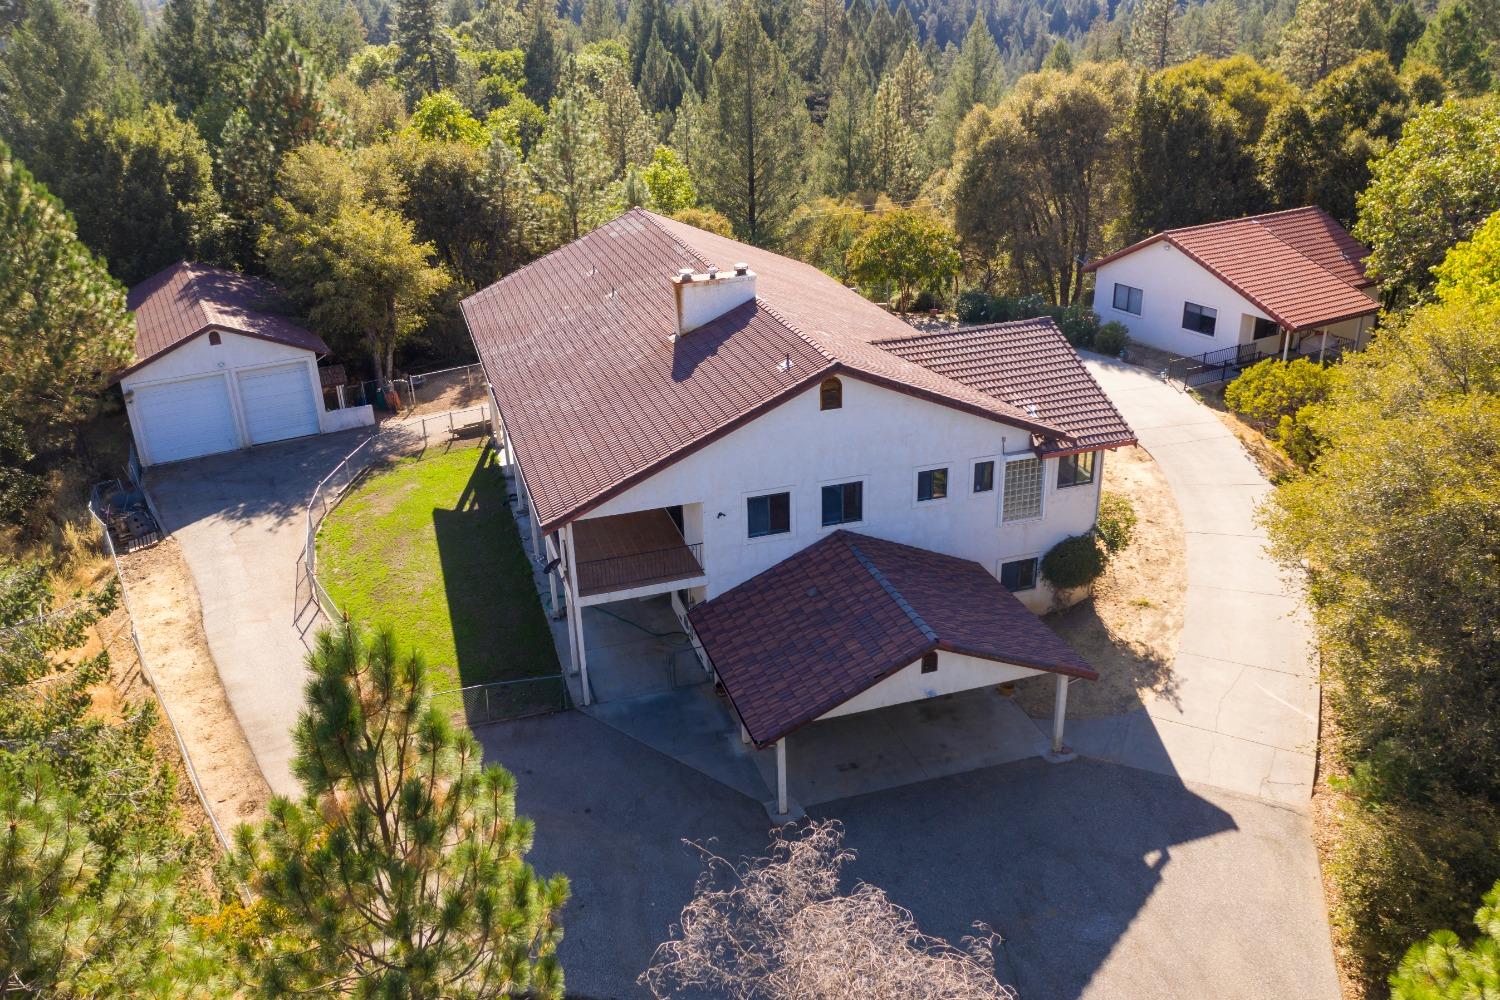 Photo of 22935 Pine Hollow Rd in Colfax, CA